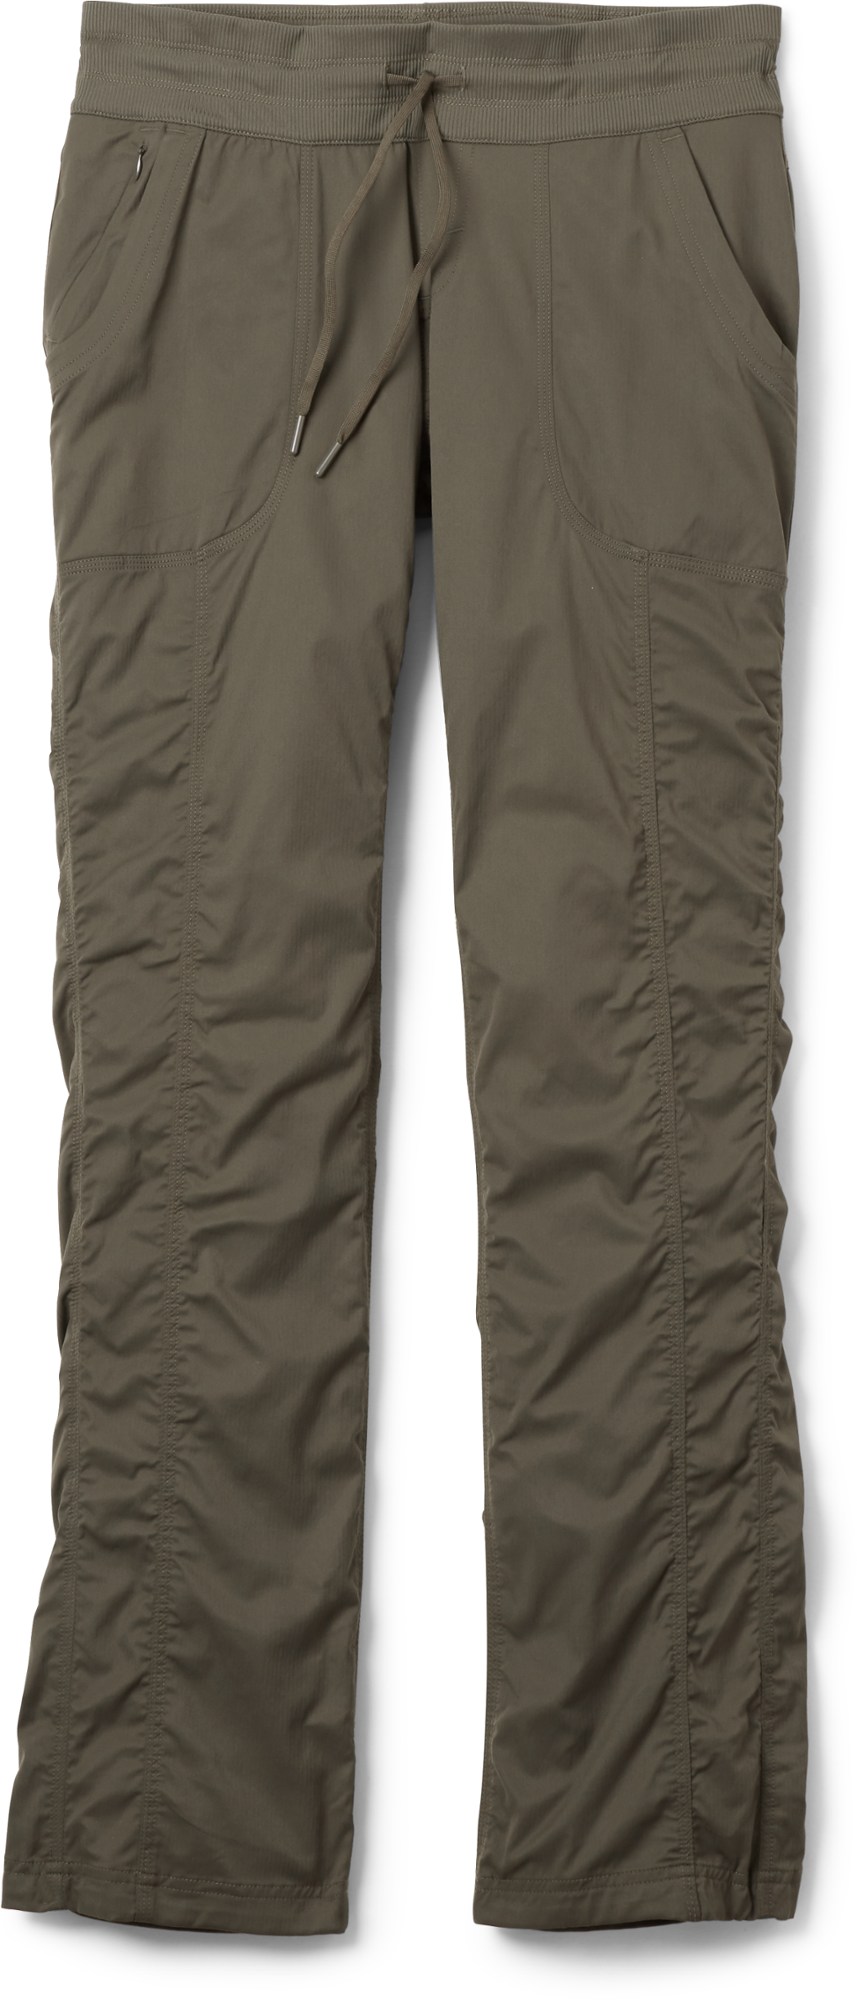 The Search for the Best Travel Pants: 15 Extended Size Options